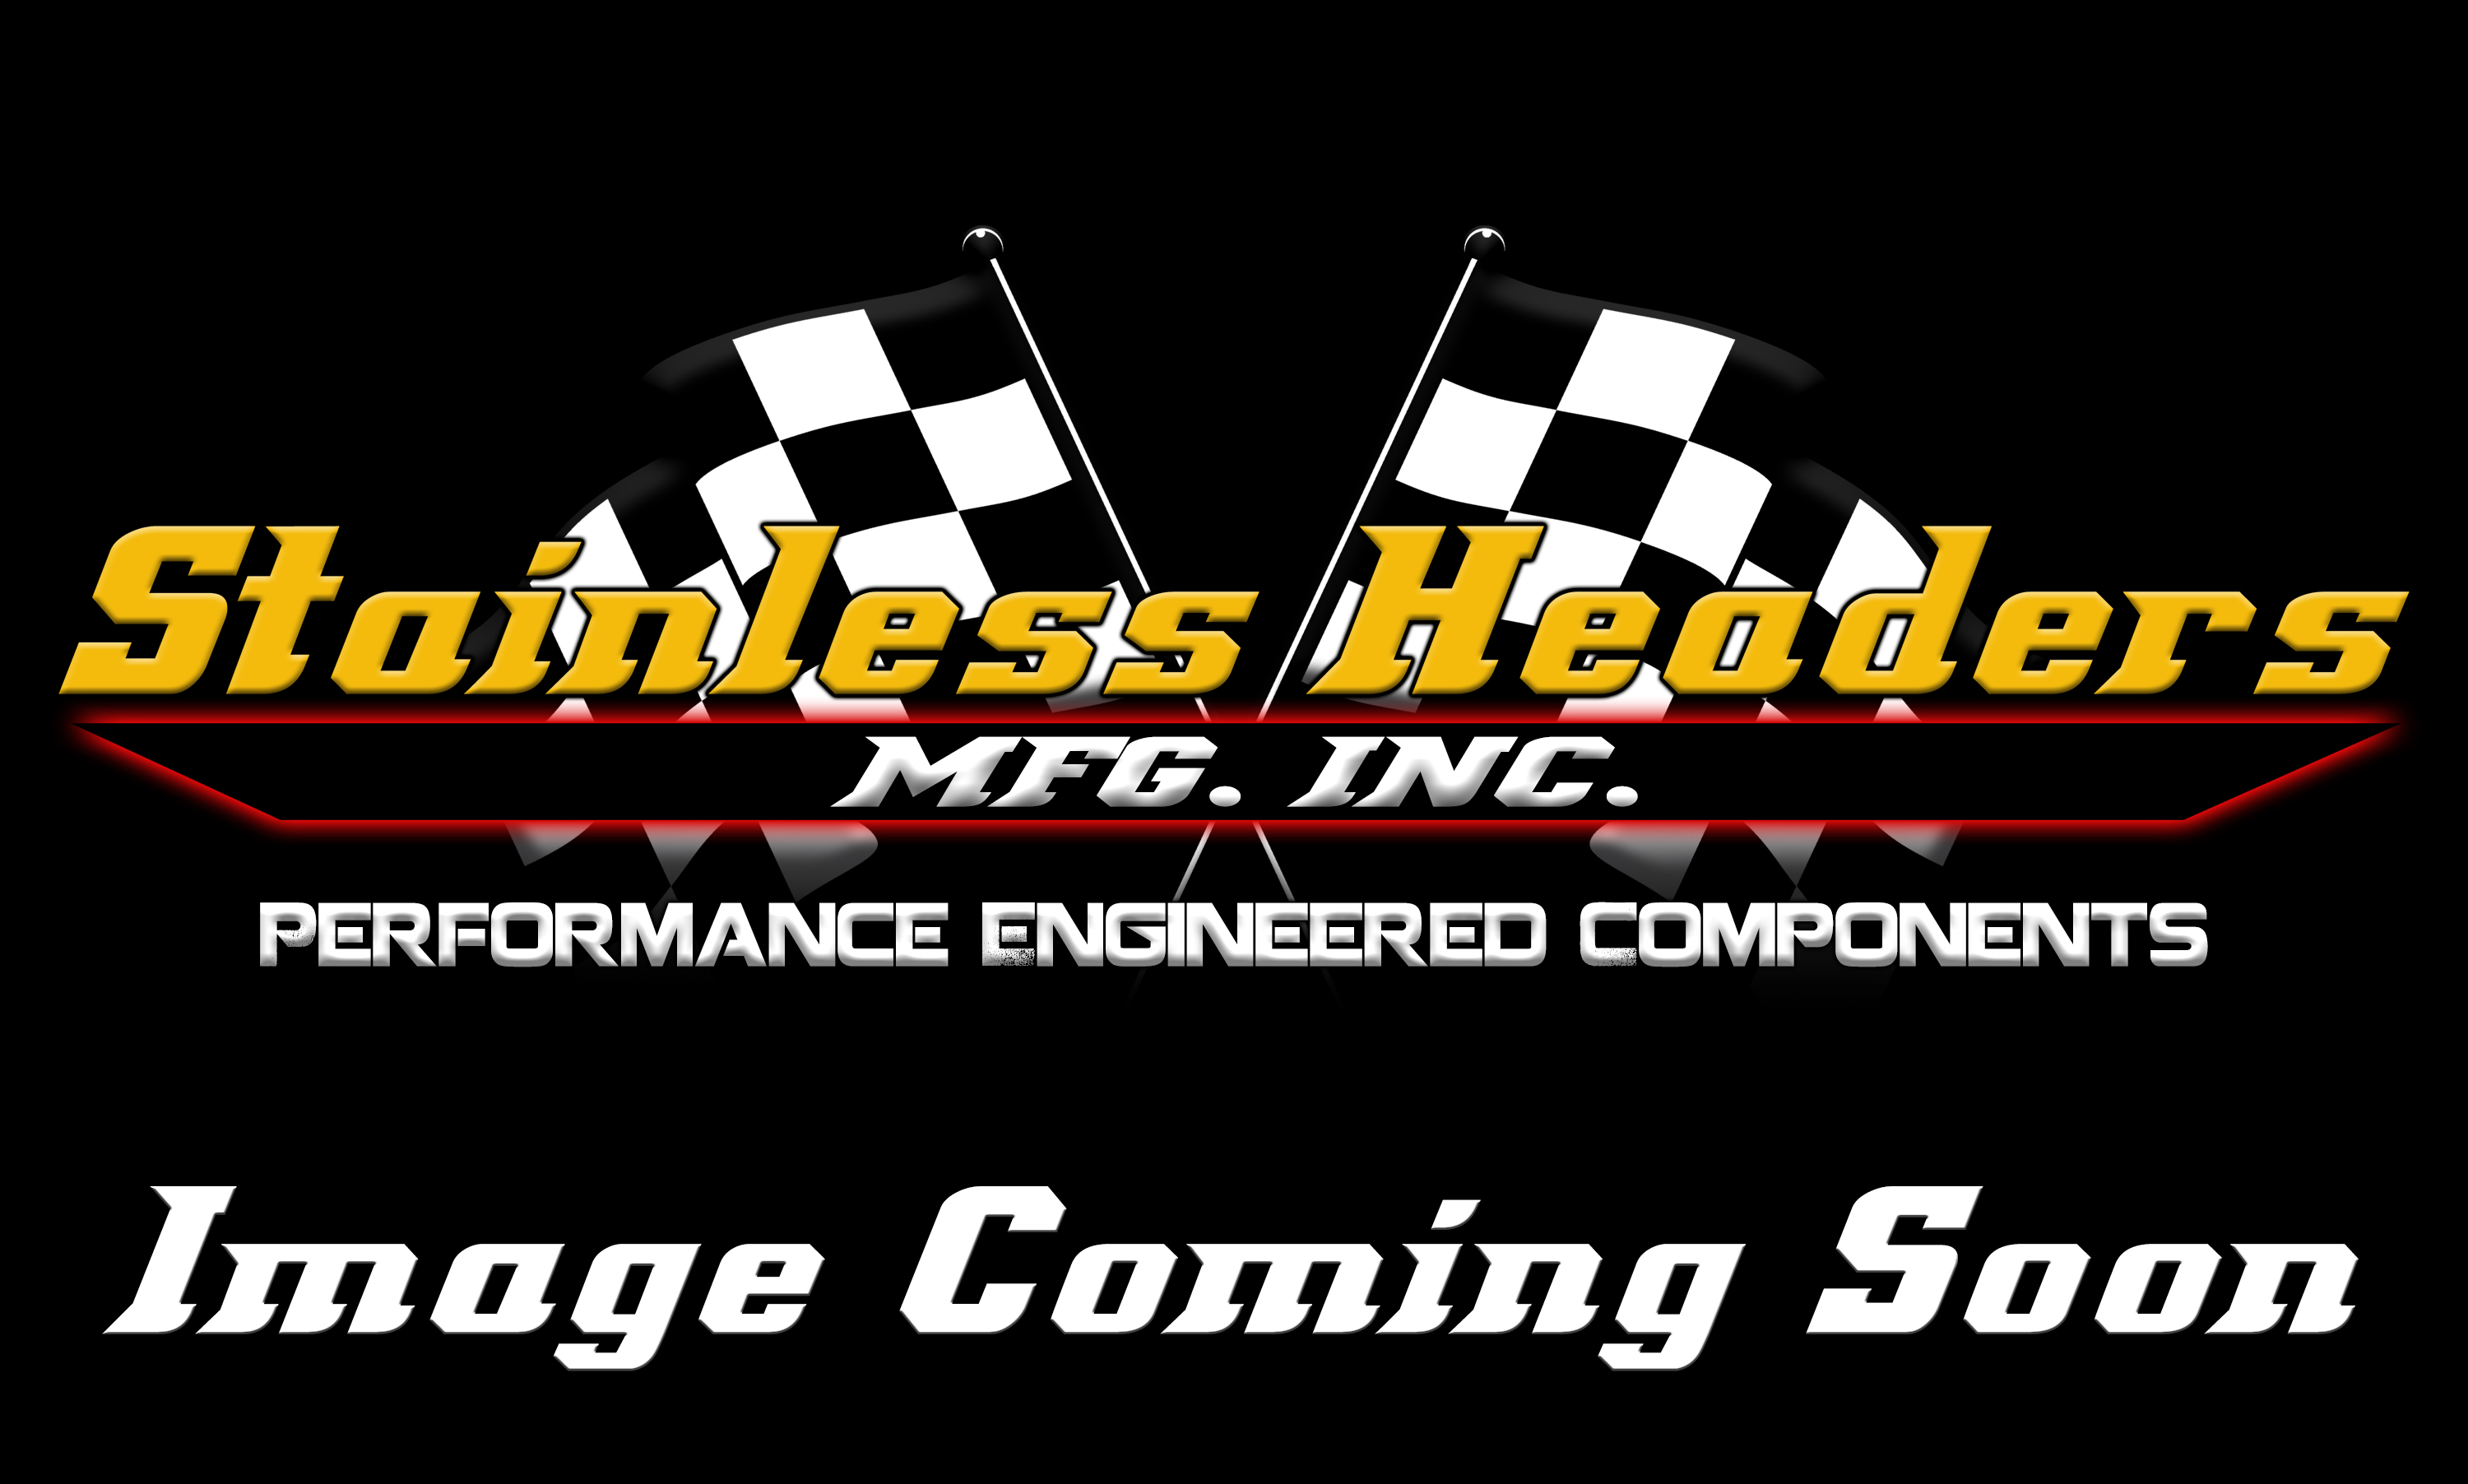 Stainless Headers - 2 1/2" Primary 4 into 1 Performance Merge Collector-16ga 304ss